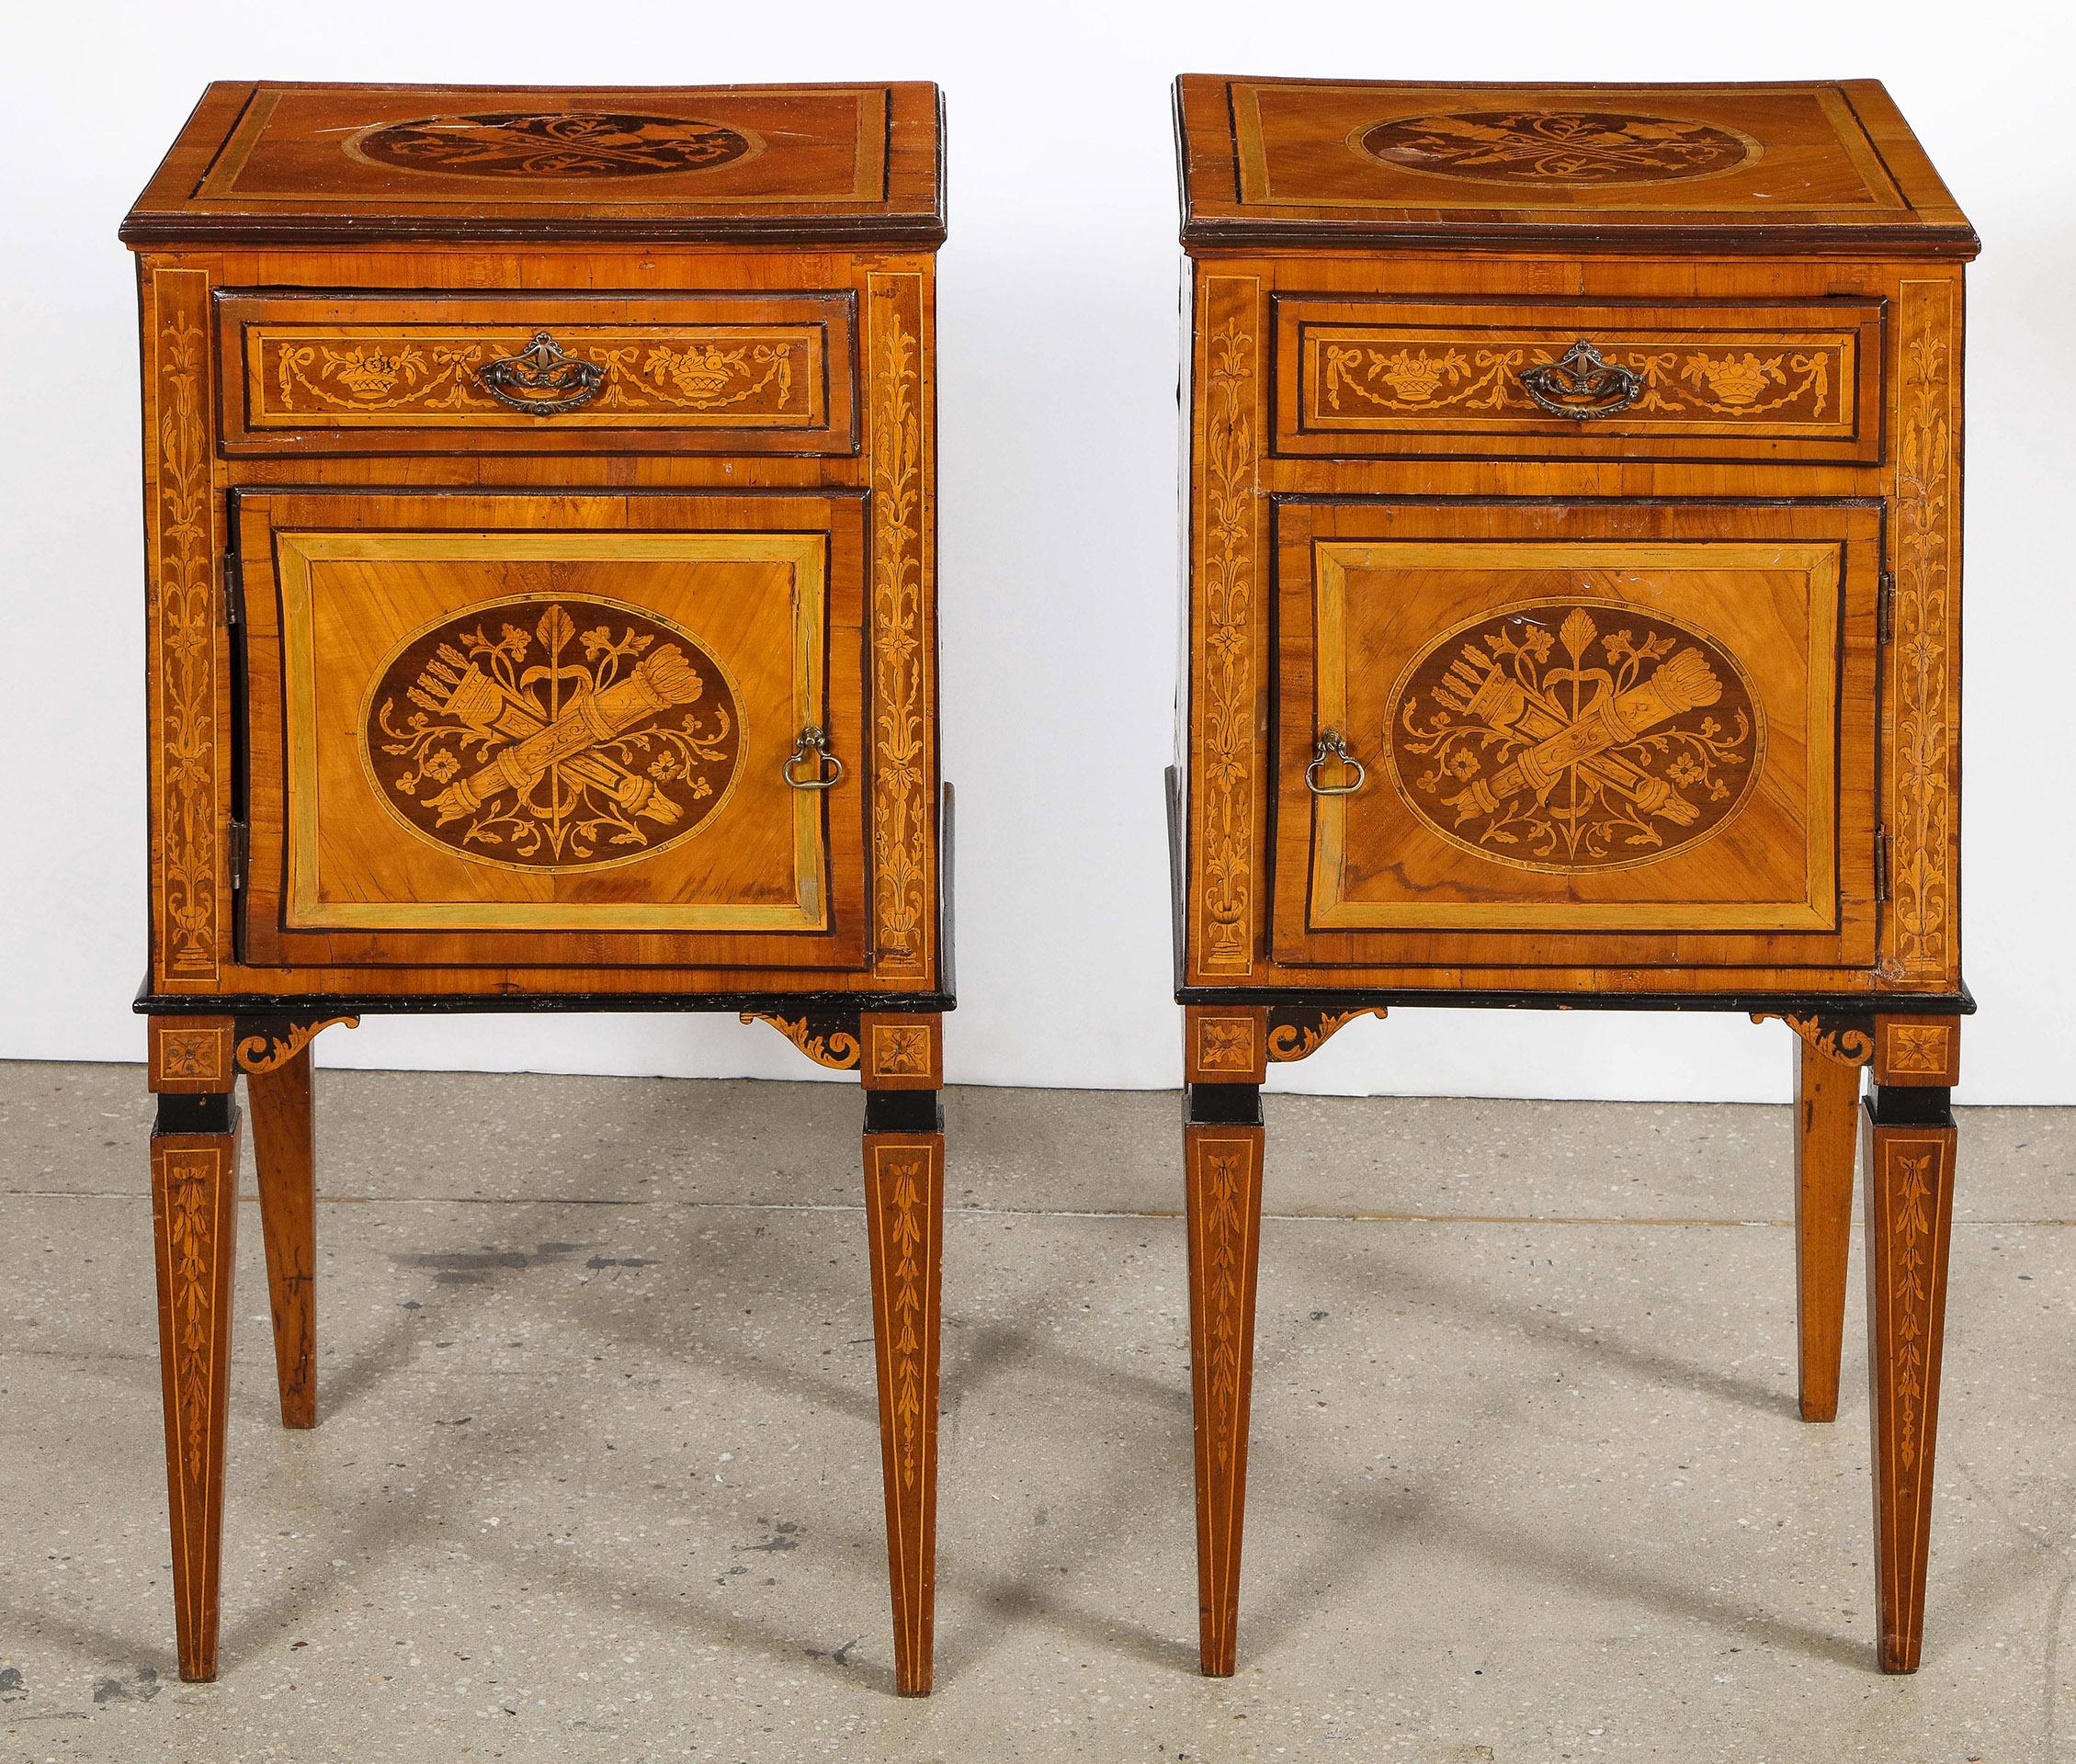 Pair of Italian neoclassic marquetry commodes.

The pair of Italian neoclassic marquetry commodes, having an intricate lyrical marquetry motif on the top, over an inlaid drawer over a single door, the door and sides with marquetry similar to the